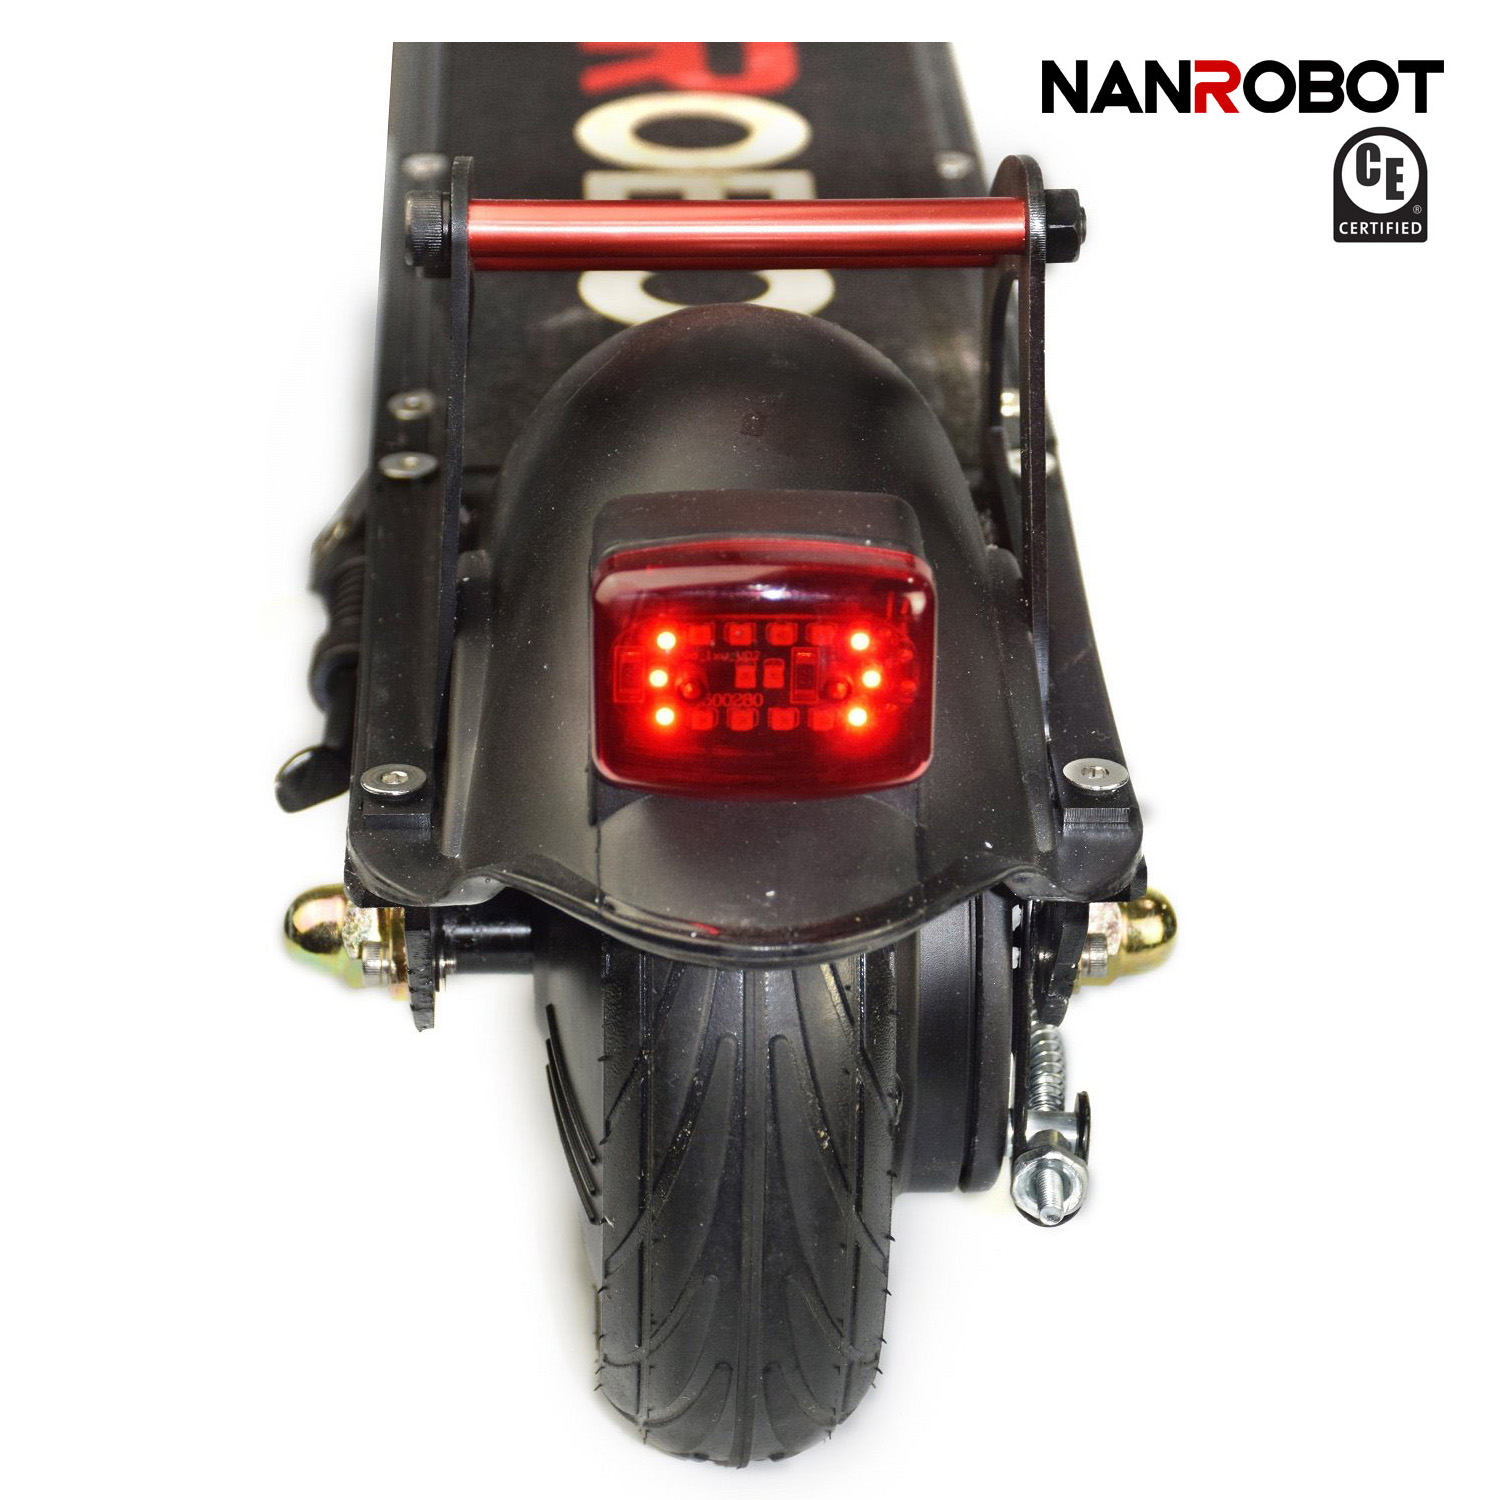 China OEM Scooter For Adults Supplier –  NANROBOT X4 ELECTRIC SCOOTER -500W-48V 10.4A – Nanrobot